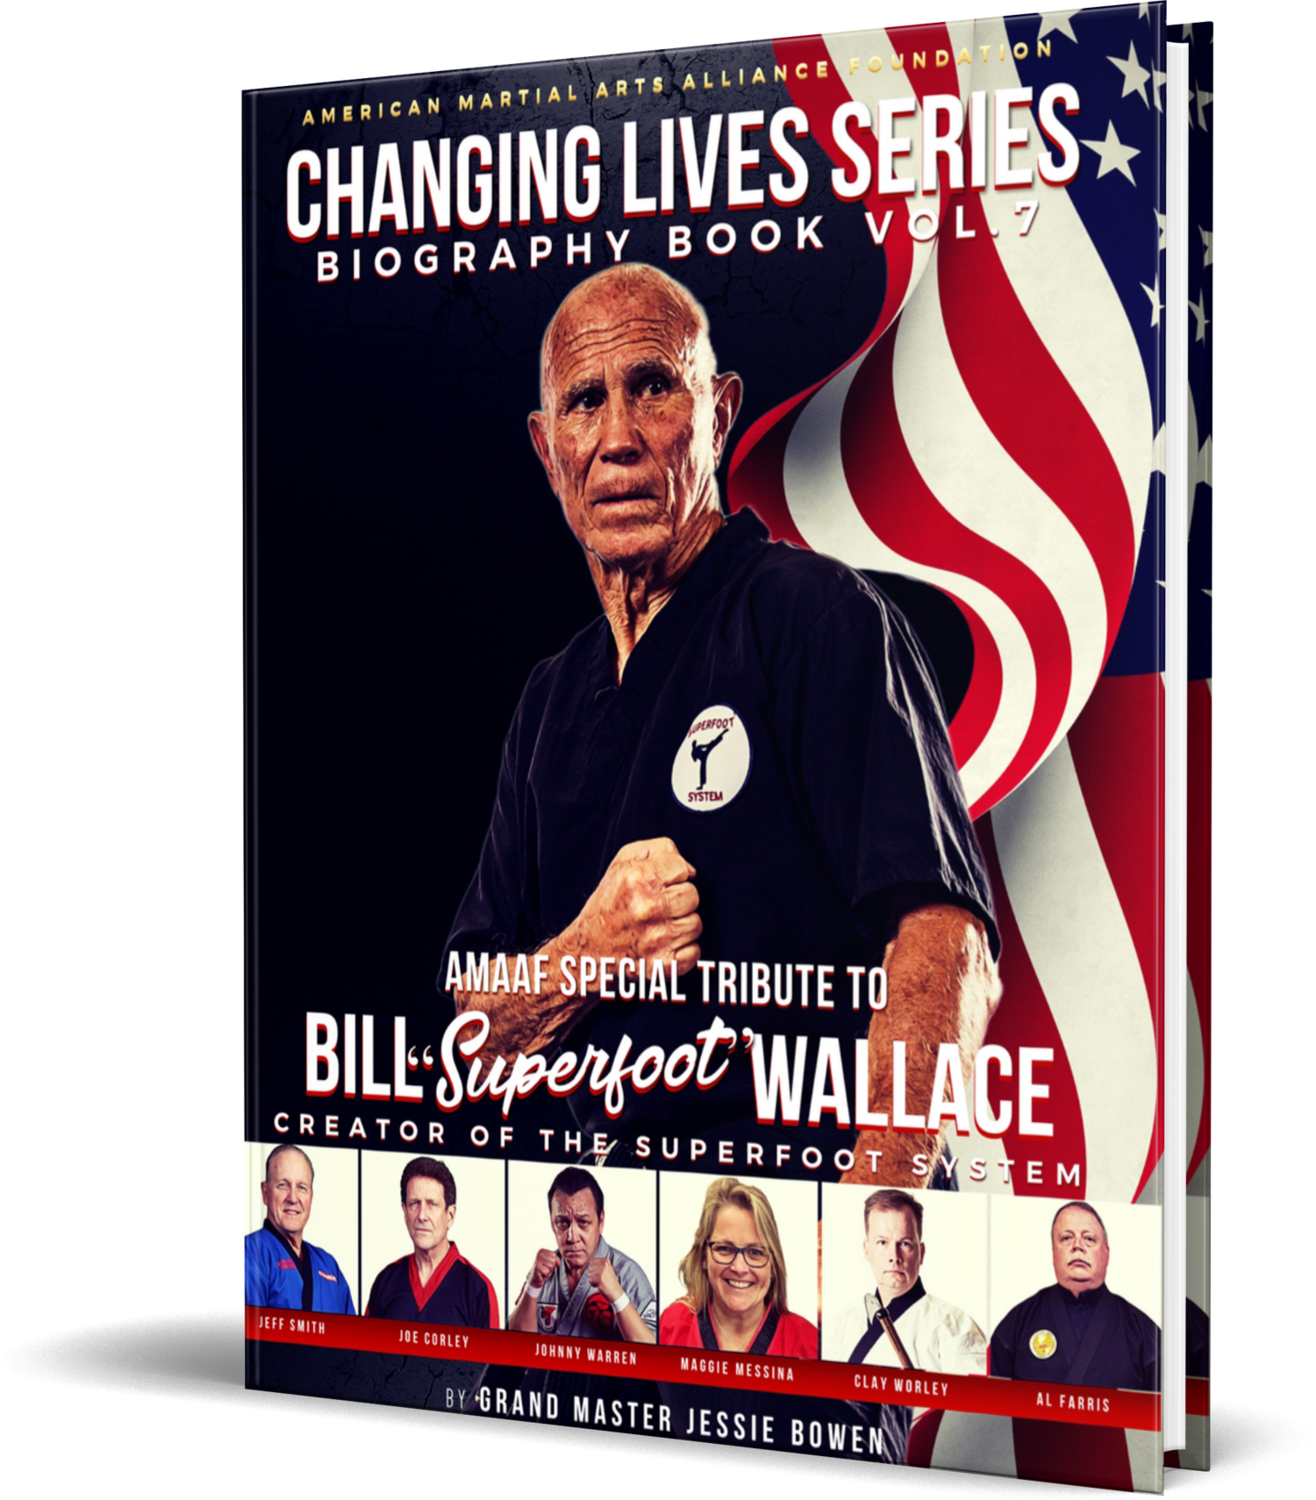 BILL "SUPERFOOT" WALLACE Martial Artists Changing Lives Biography Book (Autographed Softcover)